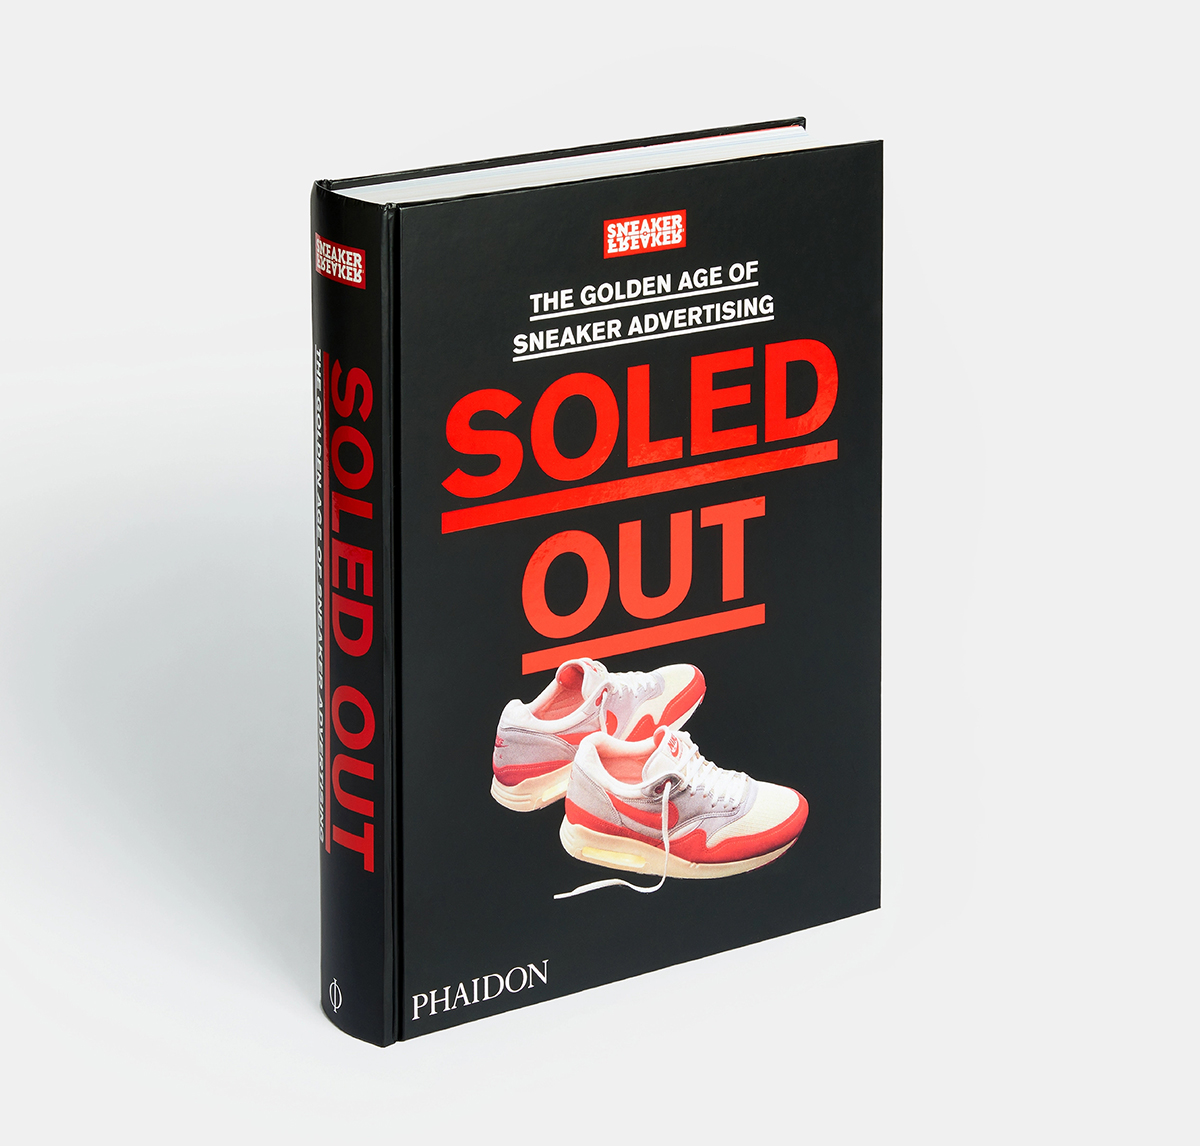 Sneaker Freaker Soled Out - The Golden Age of Sneaker Advertising side